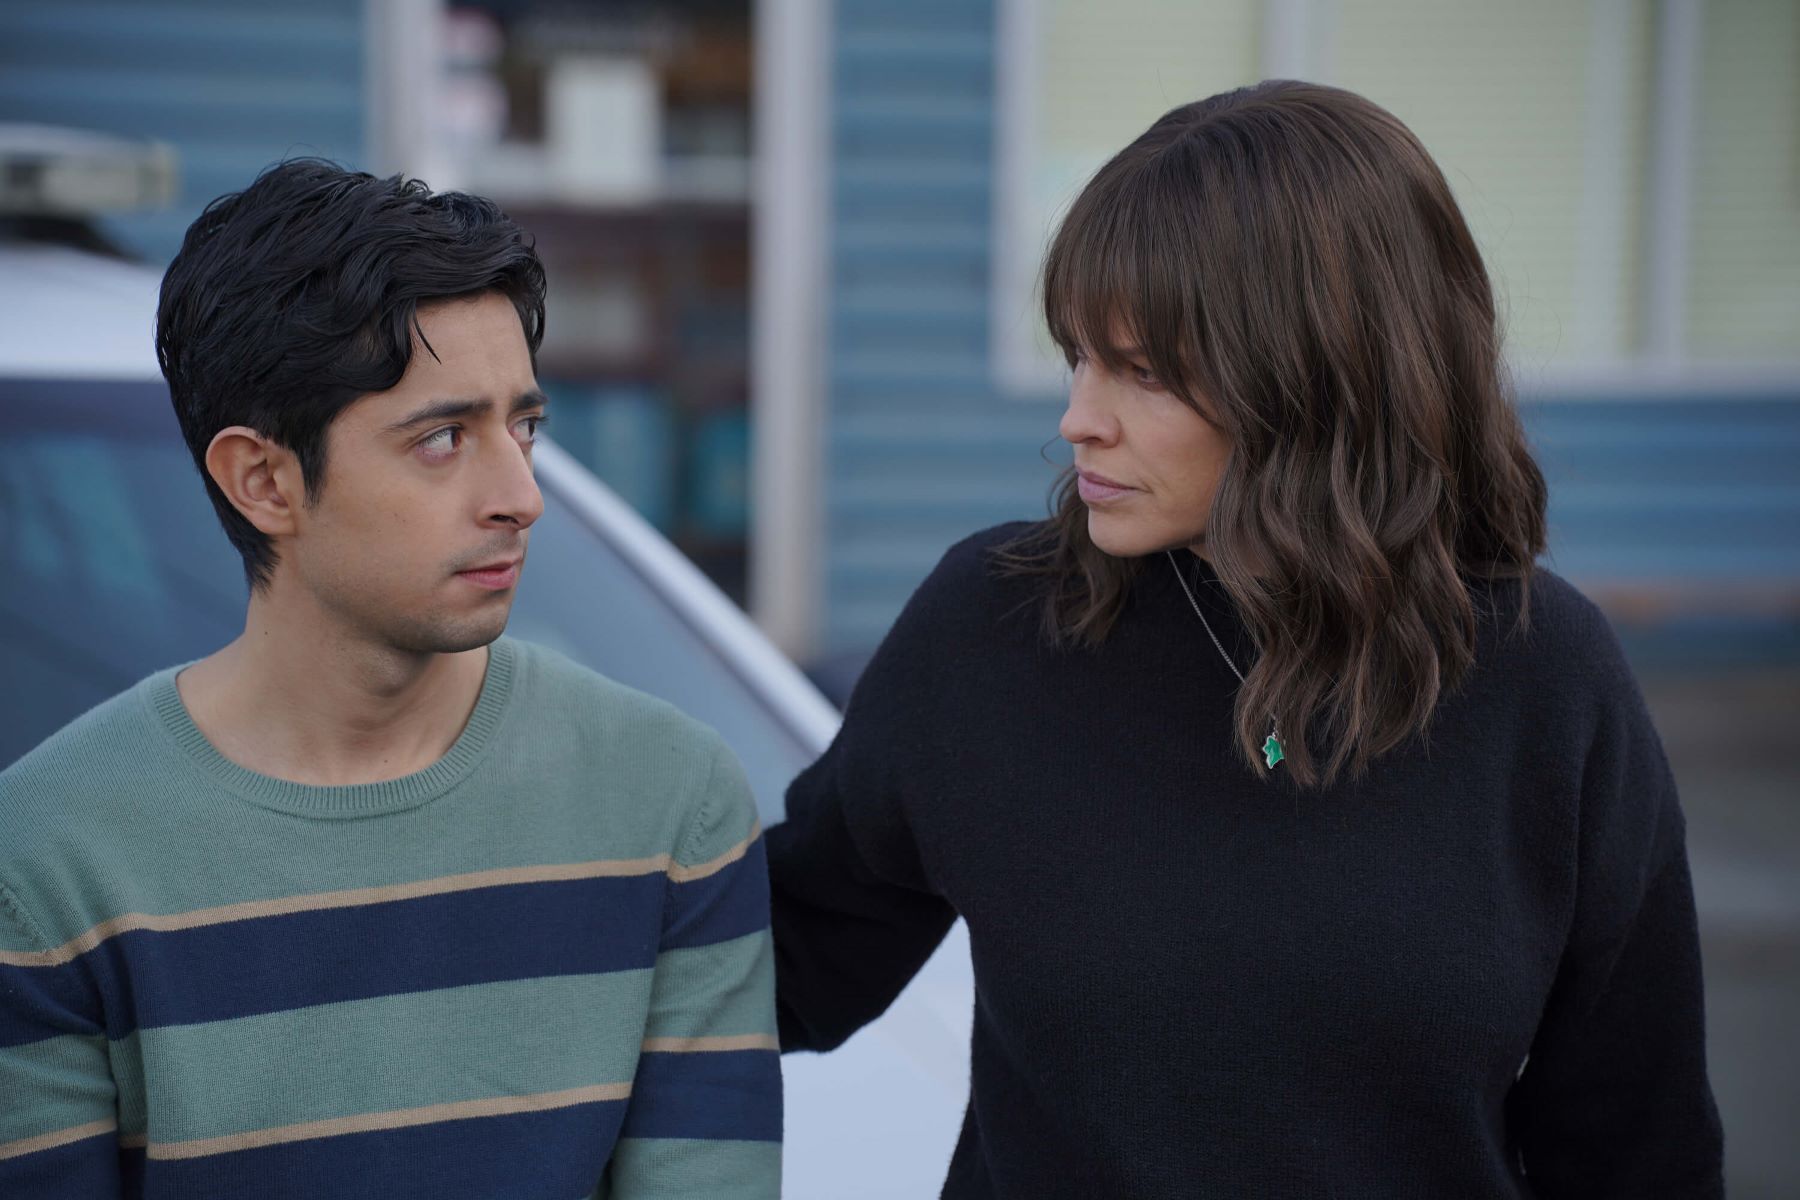 Pablo Castelblanco as Gabriel Tovar and Hilary Swank as Eileen Fitzgerald